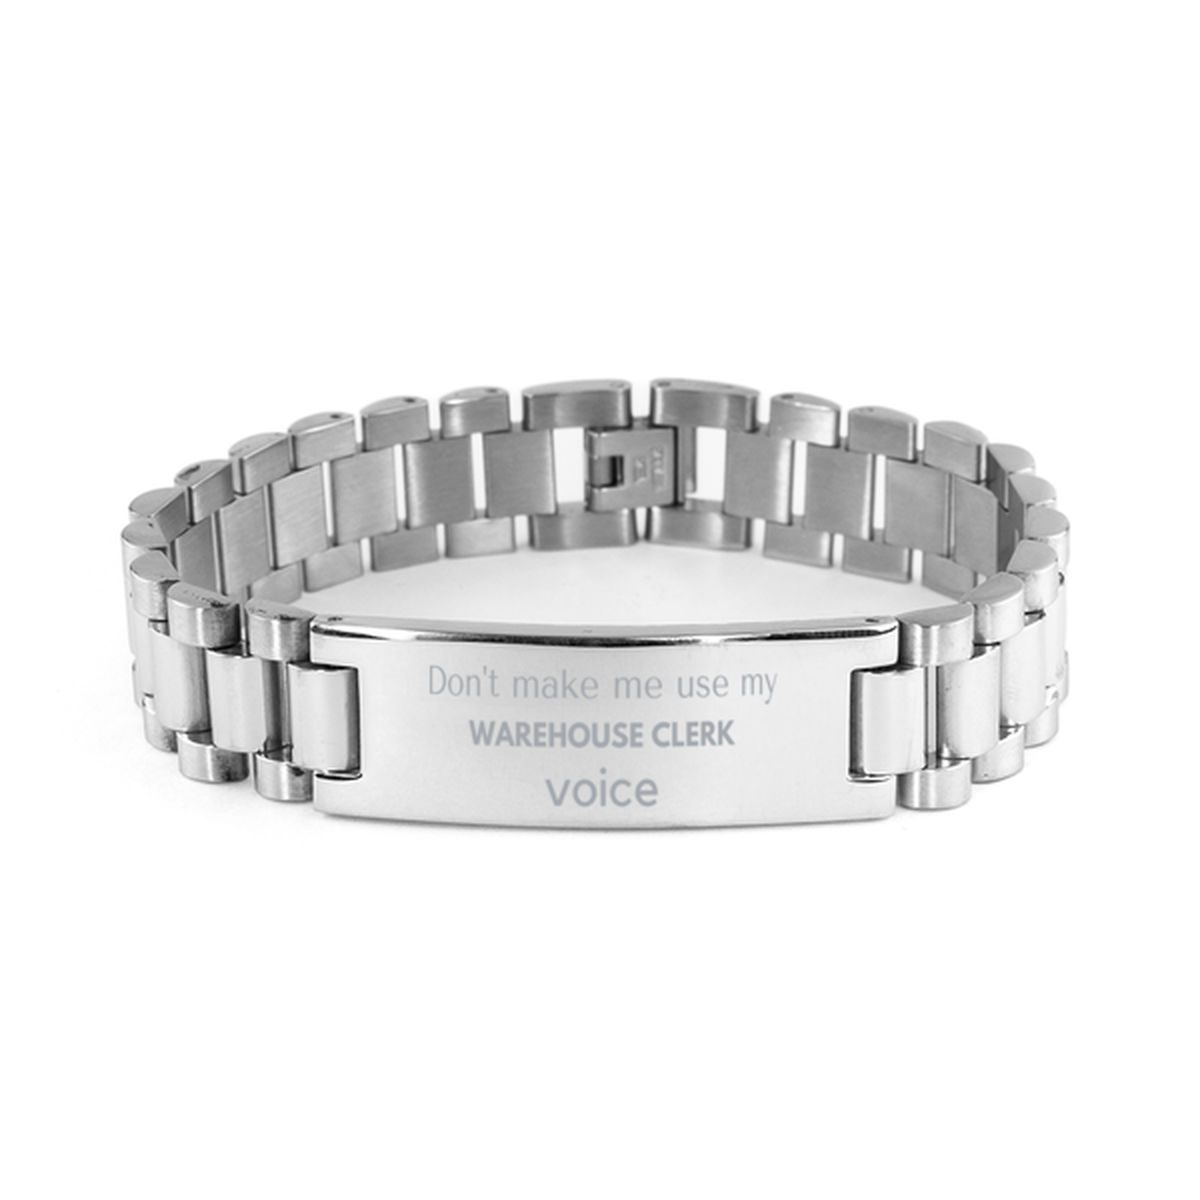 Don't make me use my Warehouse Clerk voice, Sarcasm Warehouse Clerk Gifts, Christmas Warehouse Clerk Ladder Stainless Steel Bracelet Birthday Unique Gifts For Warehouse Clerk Coworkers, Men, Women, Colleague, Friends